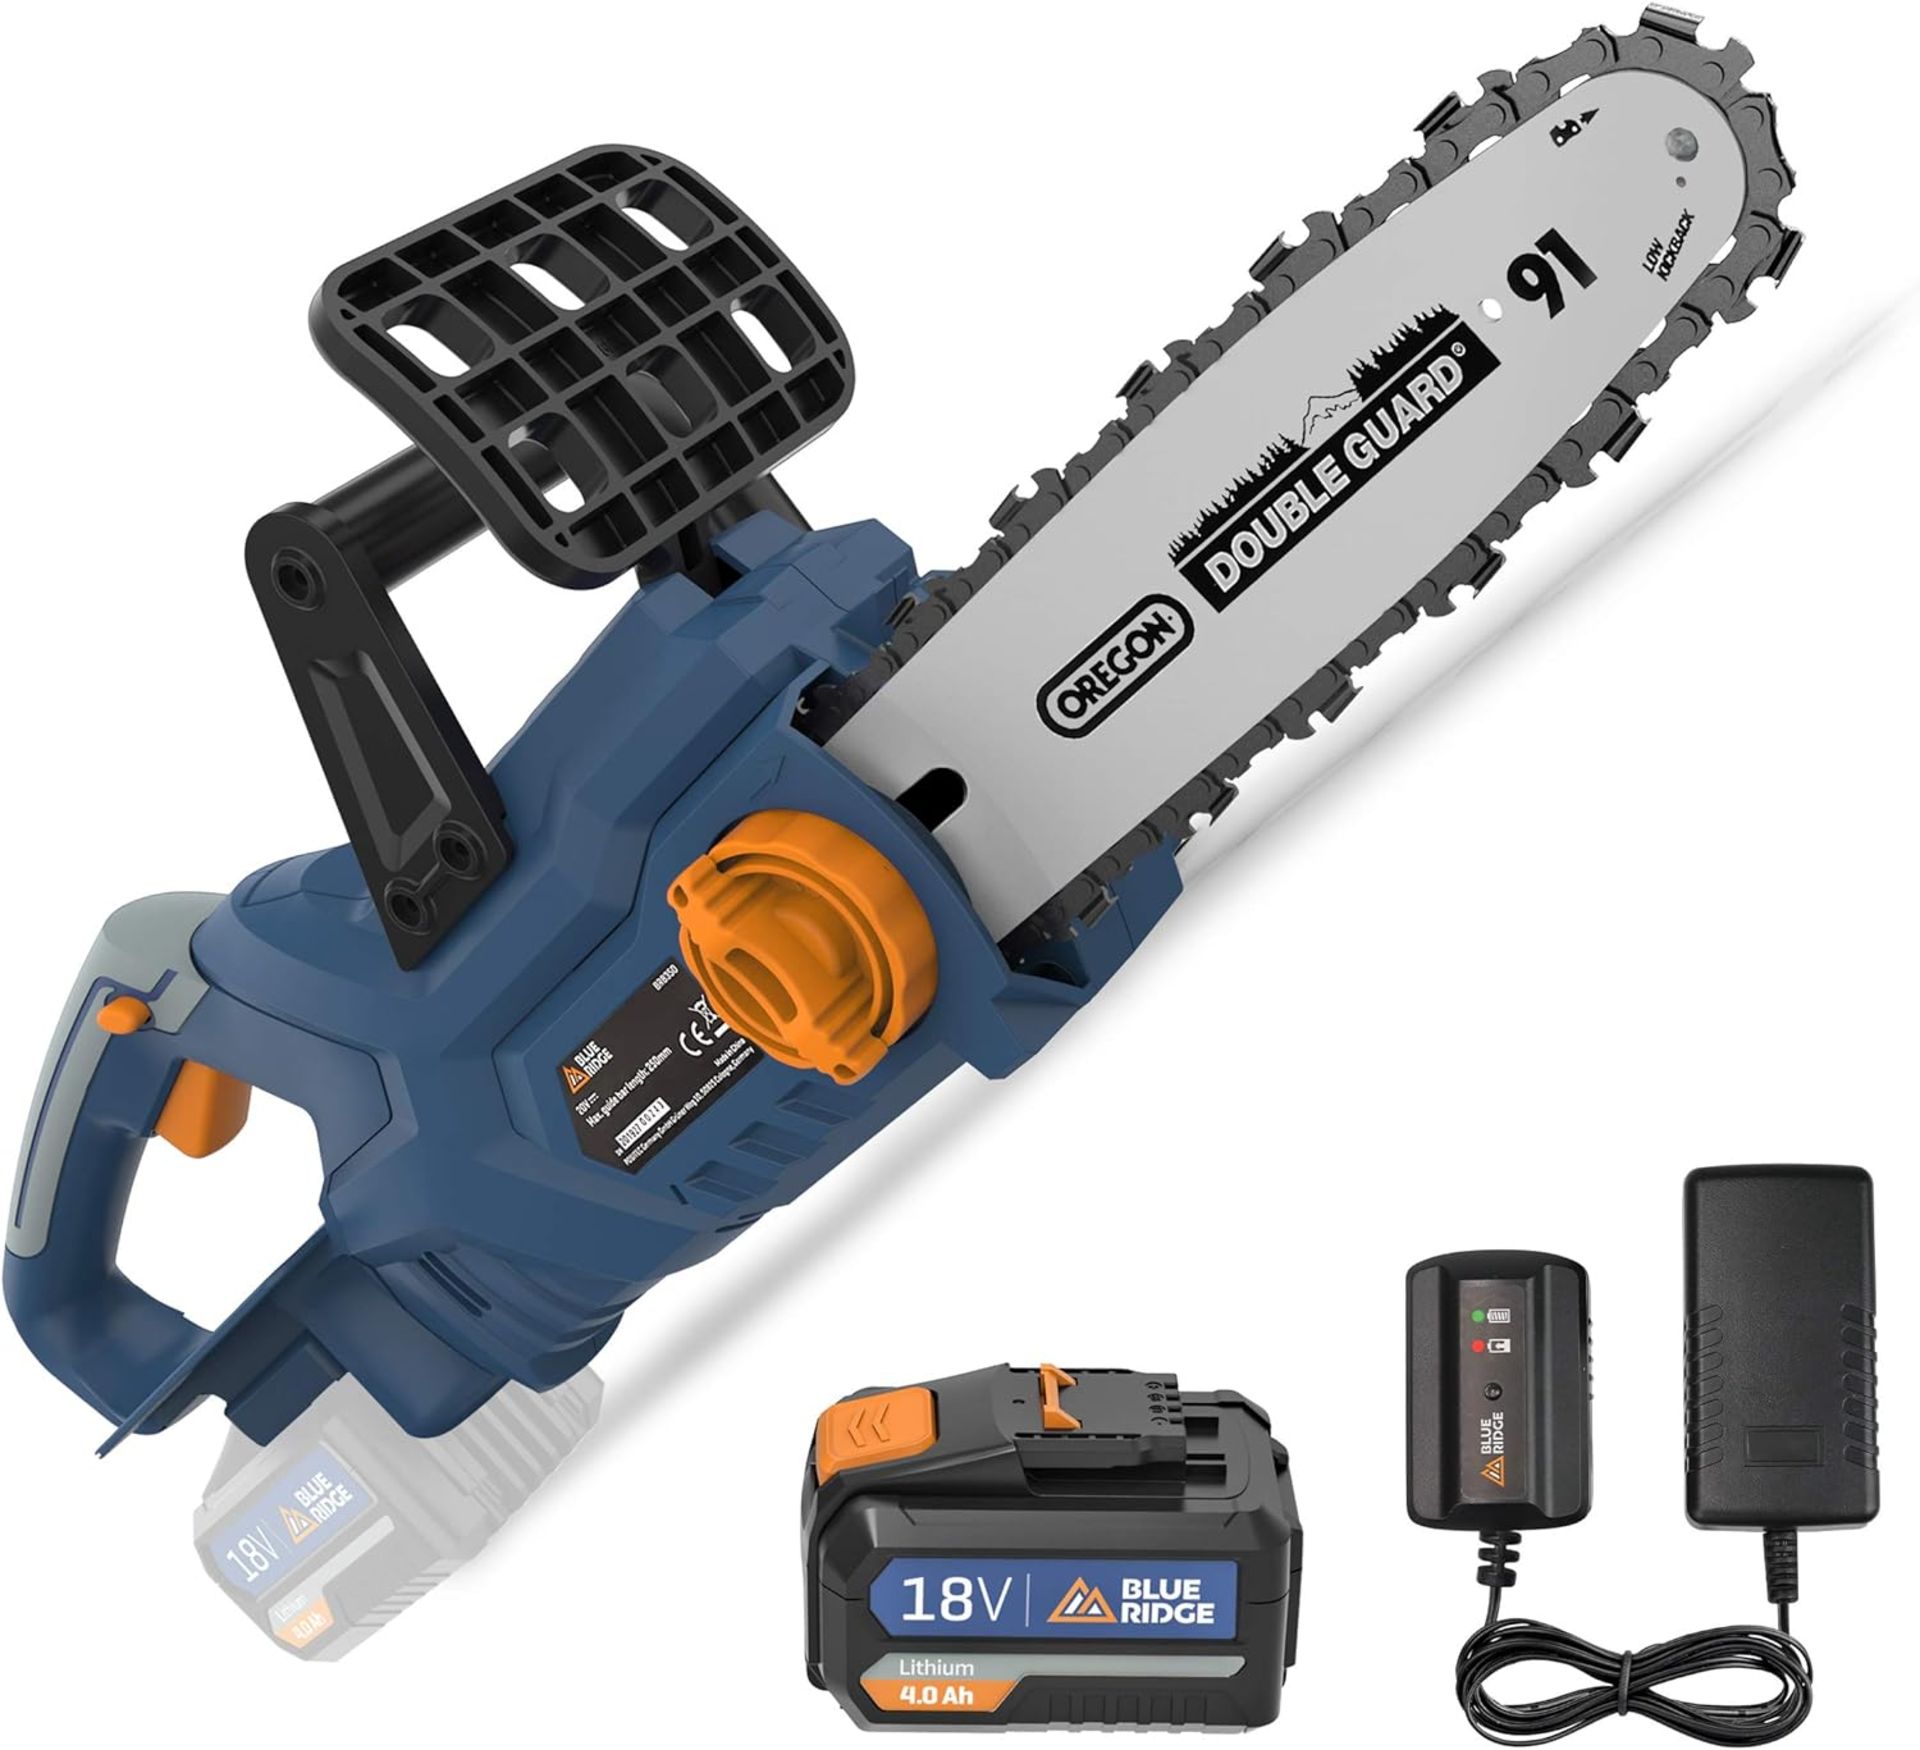 4x NEW & BOXED BLUE RIDGE 25CM 18V Chainsaw with 4.0 Ah Li-ion Battery. RRP £86.99 EACH. Equipped